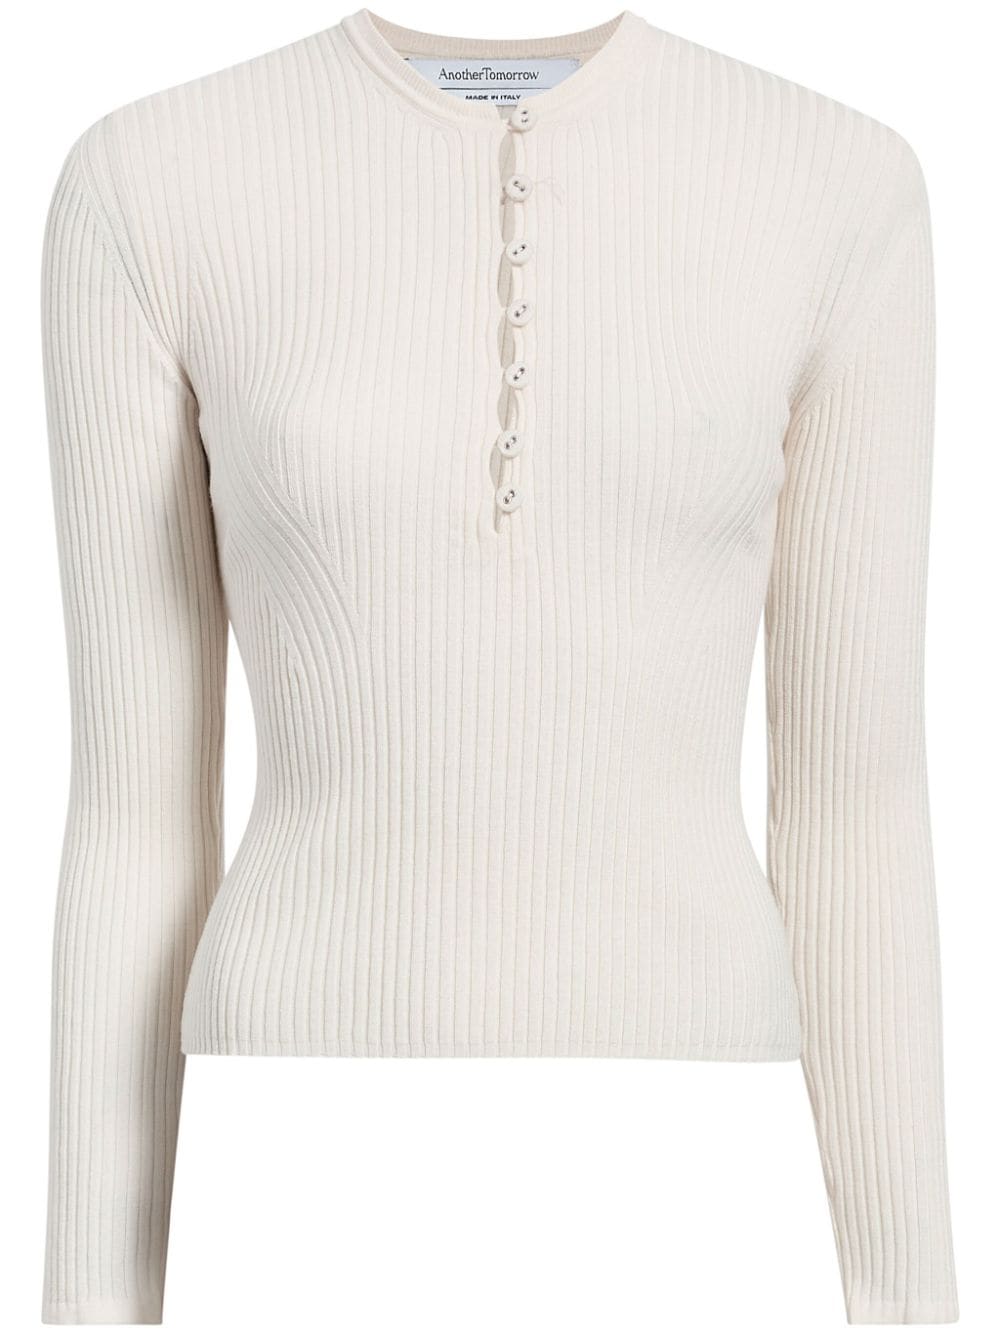 Another Tomorrow ribbed-knit wool jumper - Neutrals von Another Tomorrow